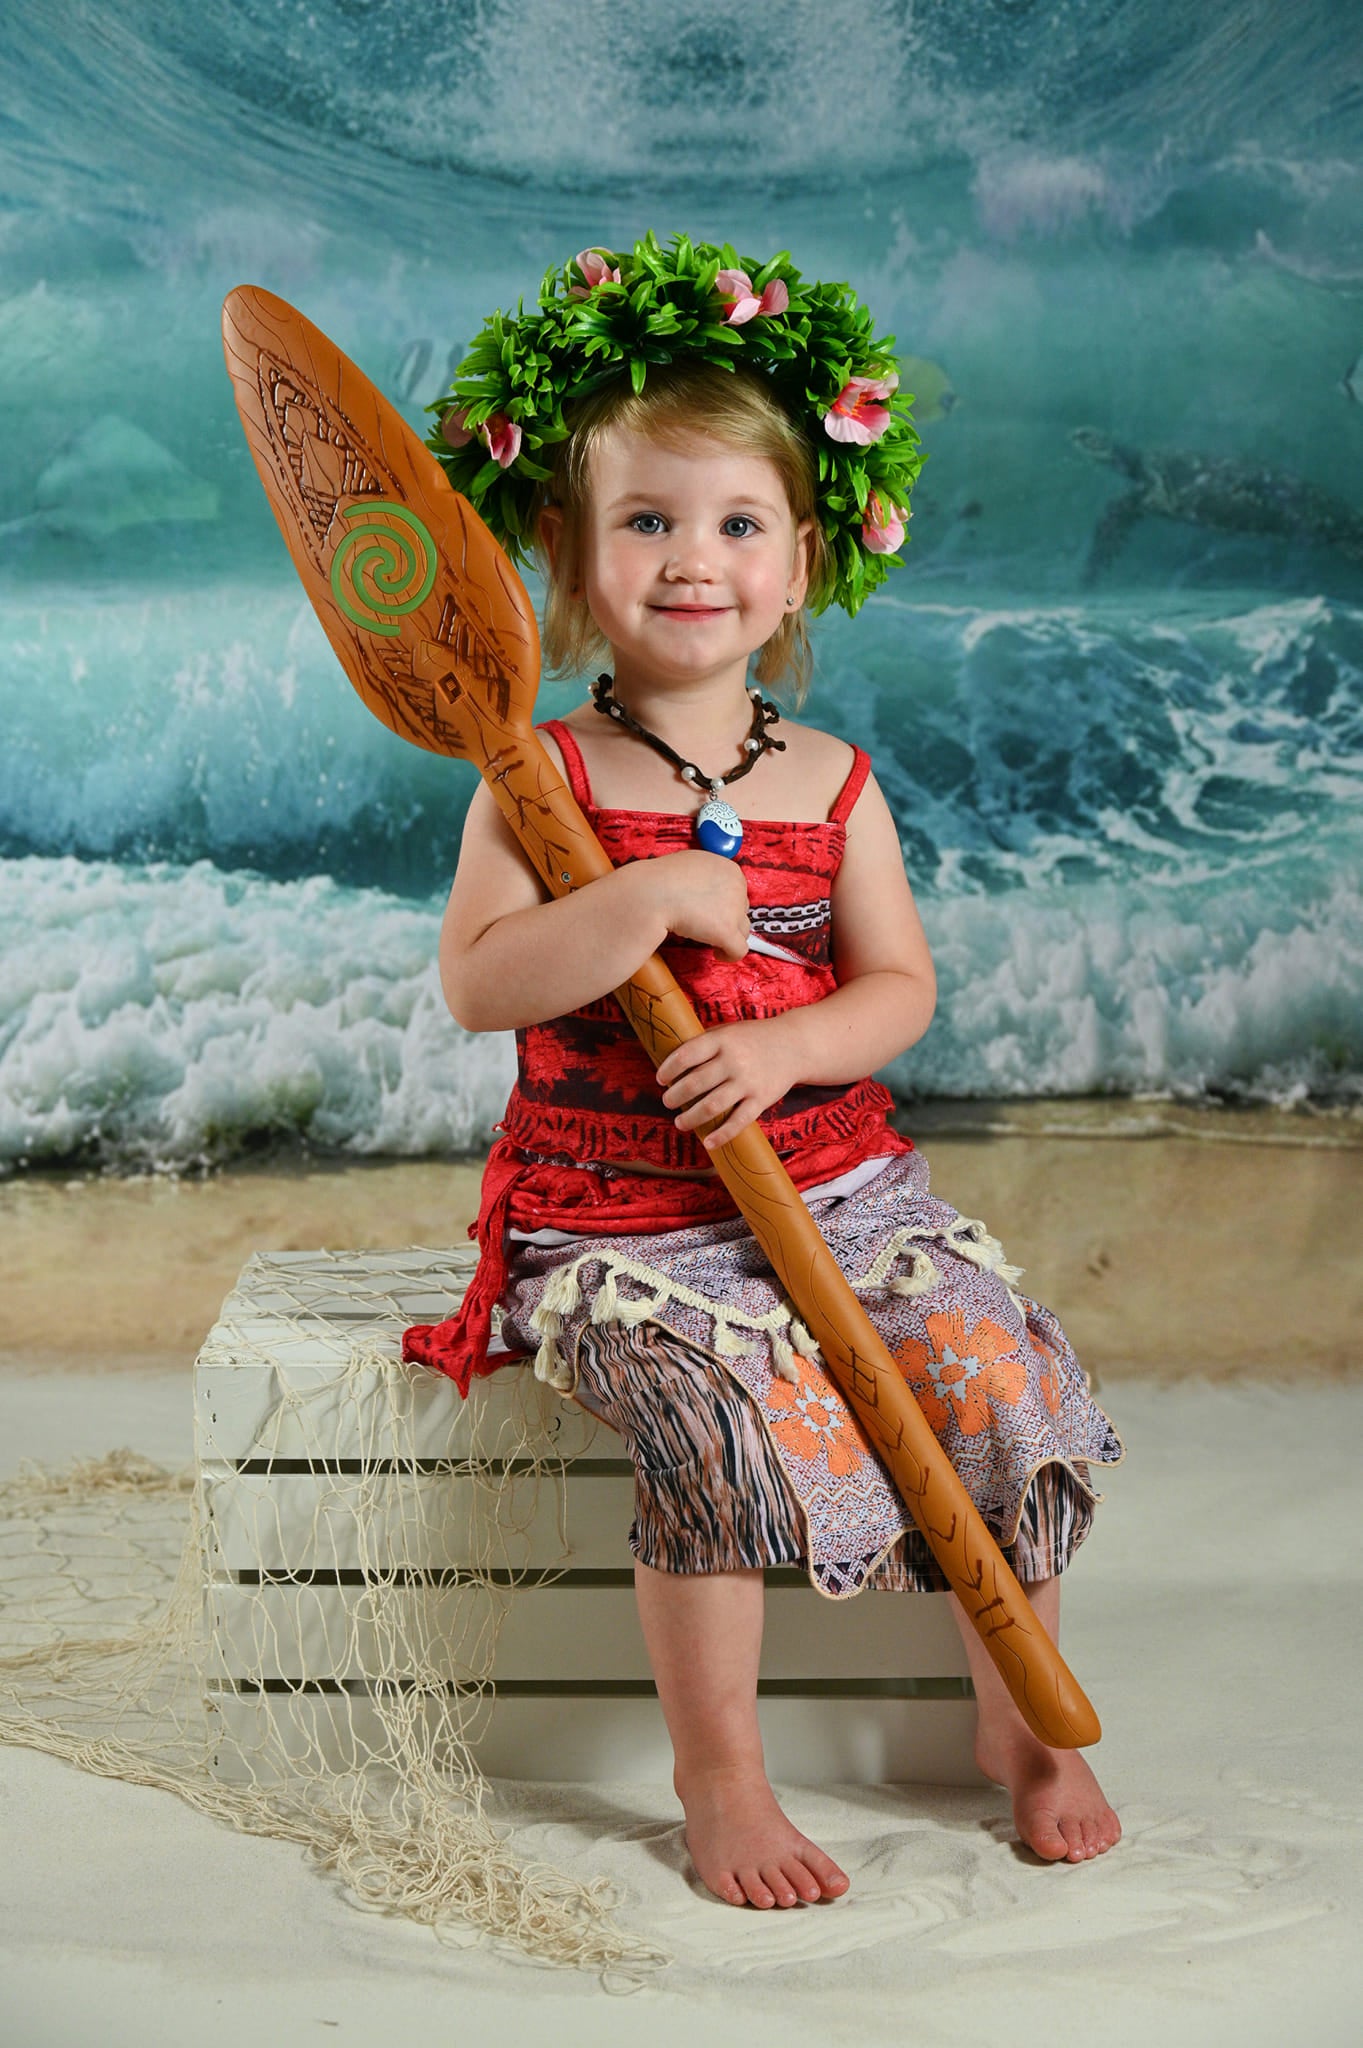 Kate Summer Beach Waves Backdrop Designed by Rosabell Photography